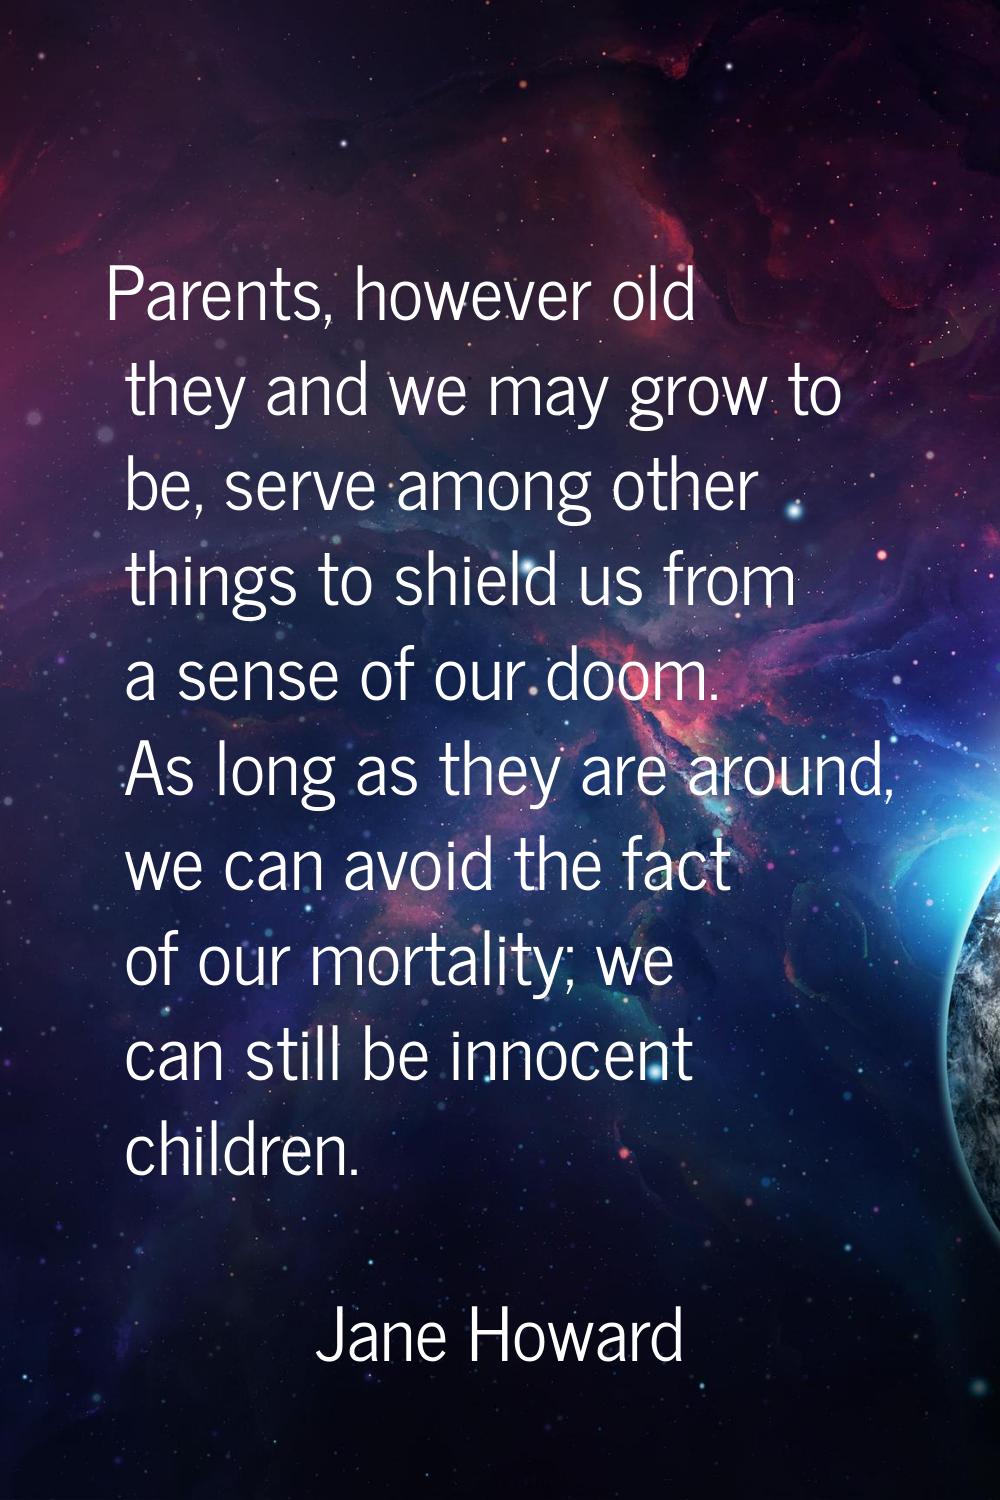 Parents, however old they and we may grow to be, serve among other things to shield us from a sense